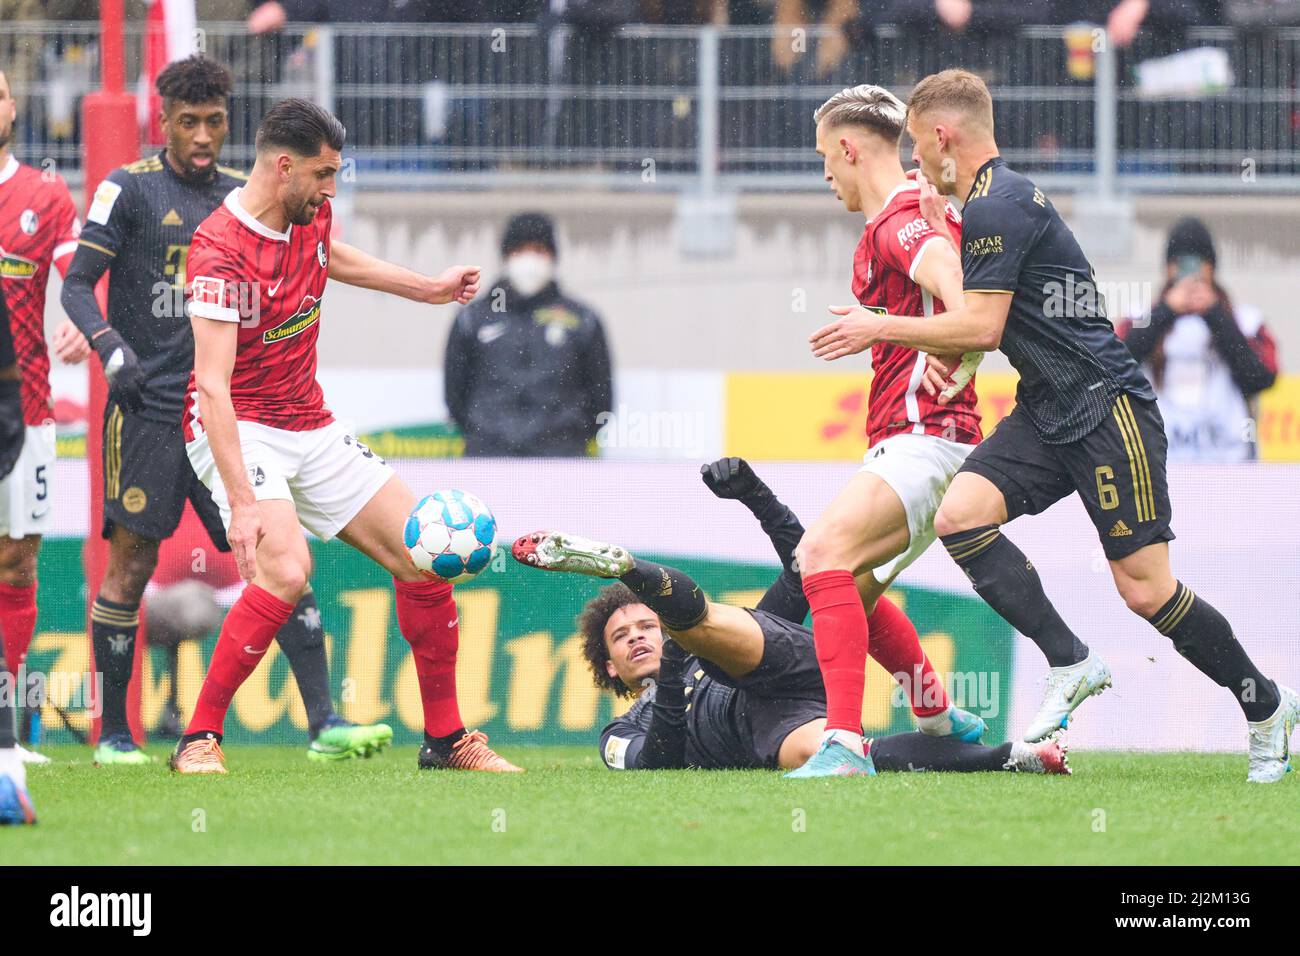 Freiburg, Germany. 02nd Apr, 2022. Leroy SANE, FCB 10  compete for the ball, tackling, duel, header, zweikampf, action, fight against Nico Schlotterbeck, FRG 4 Vincenzo GRIFO, FRG 32   in the match SC FREIBURG - FC BAYERN MÜNCHEN  1.German Football League on April 2, 2022 in Freiburg, Germany. Season 2021/2022, matchday 28, 1.Bundesliga, FCB, München, 28.Spieltag. FCB, © Peter Schatz / Alamy Live News    - DFL REGULATIONS PROHIBIT ANY USE OF PHOTOGRAPHS as IMAGE SEQUENCES and/or QUASI-VIDEO - Credit: Peter Schatz/Alamy Live News Stock Photo